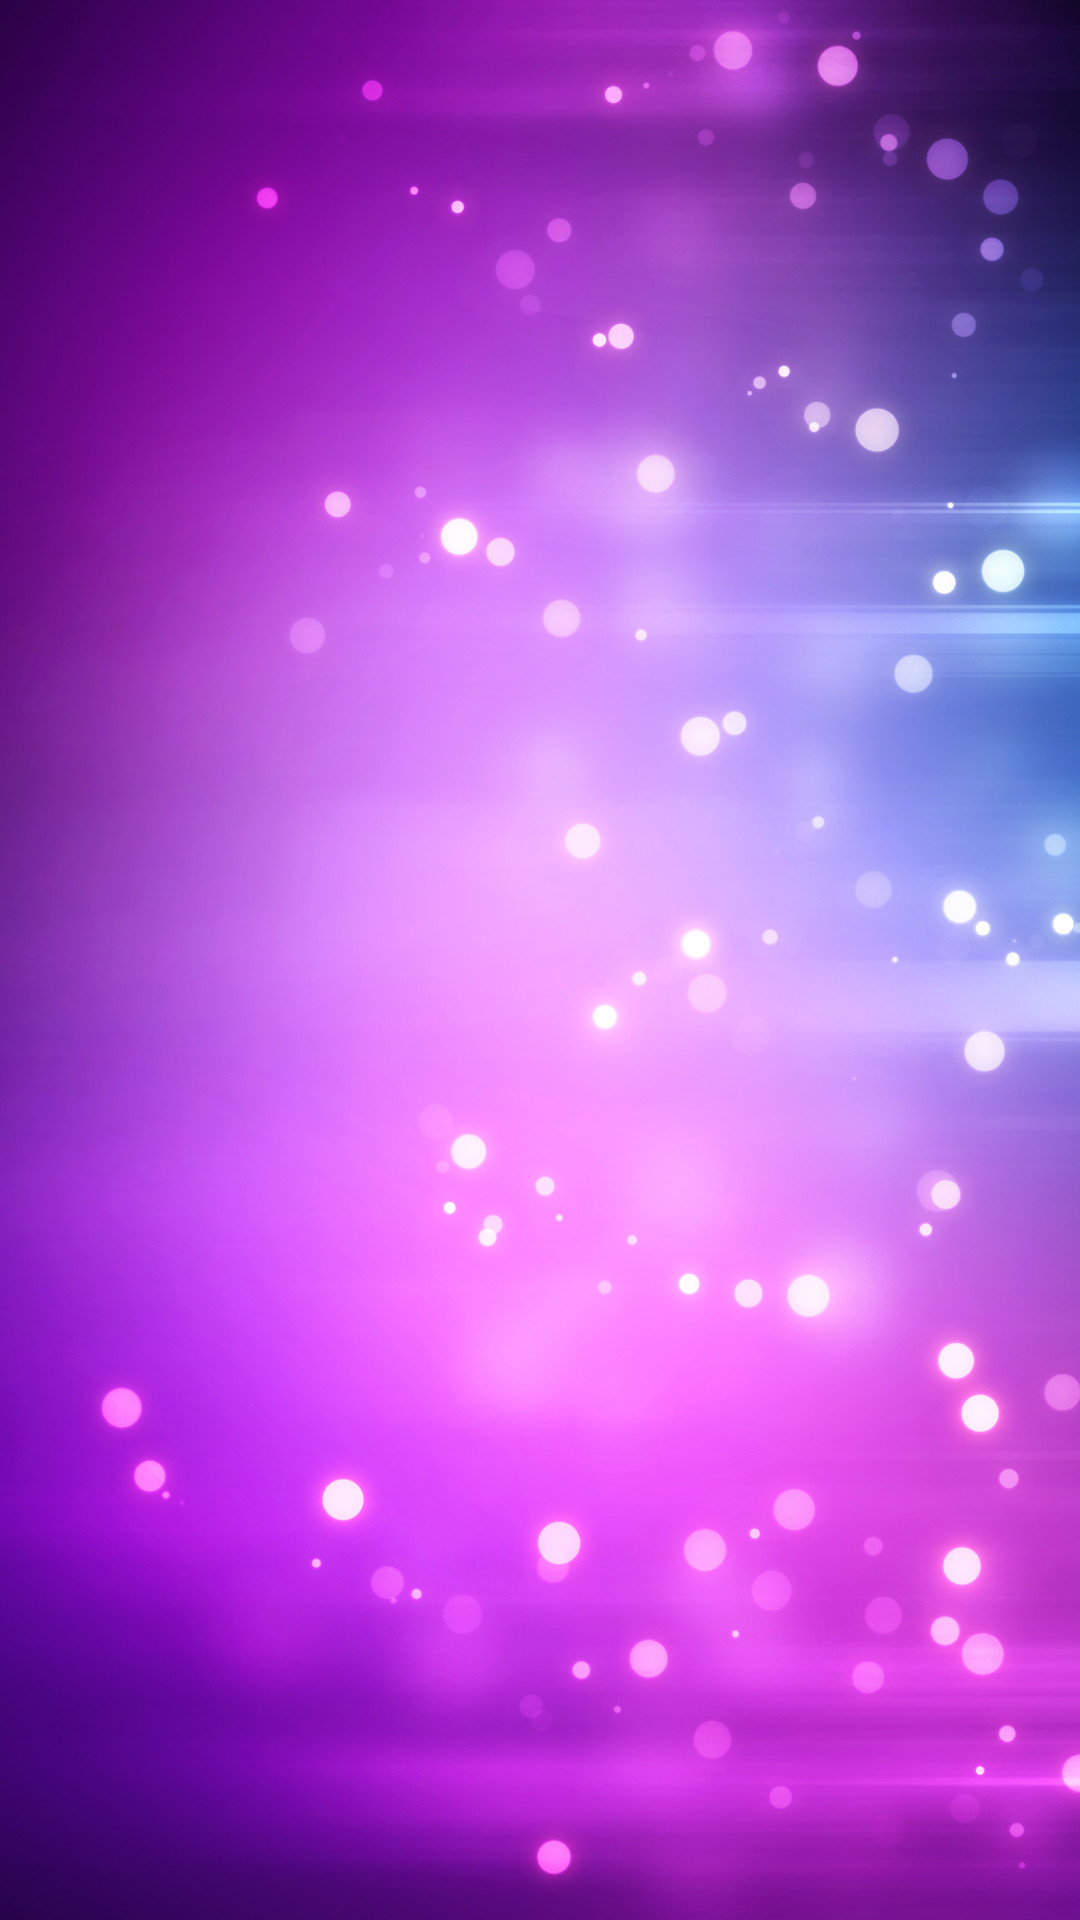 1080x1920 Beautiful Pink Purple Blue Abstract HD Mobile Wallpaper -  http://helpyourselfimages.com